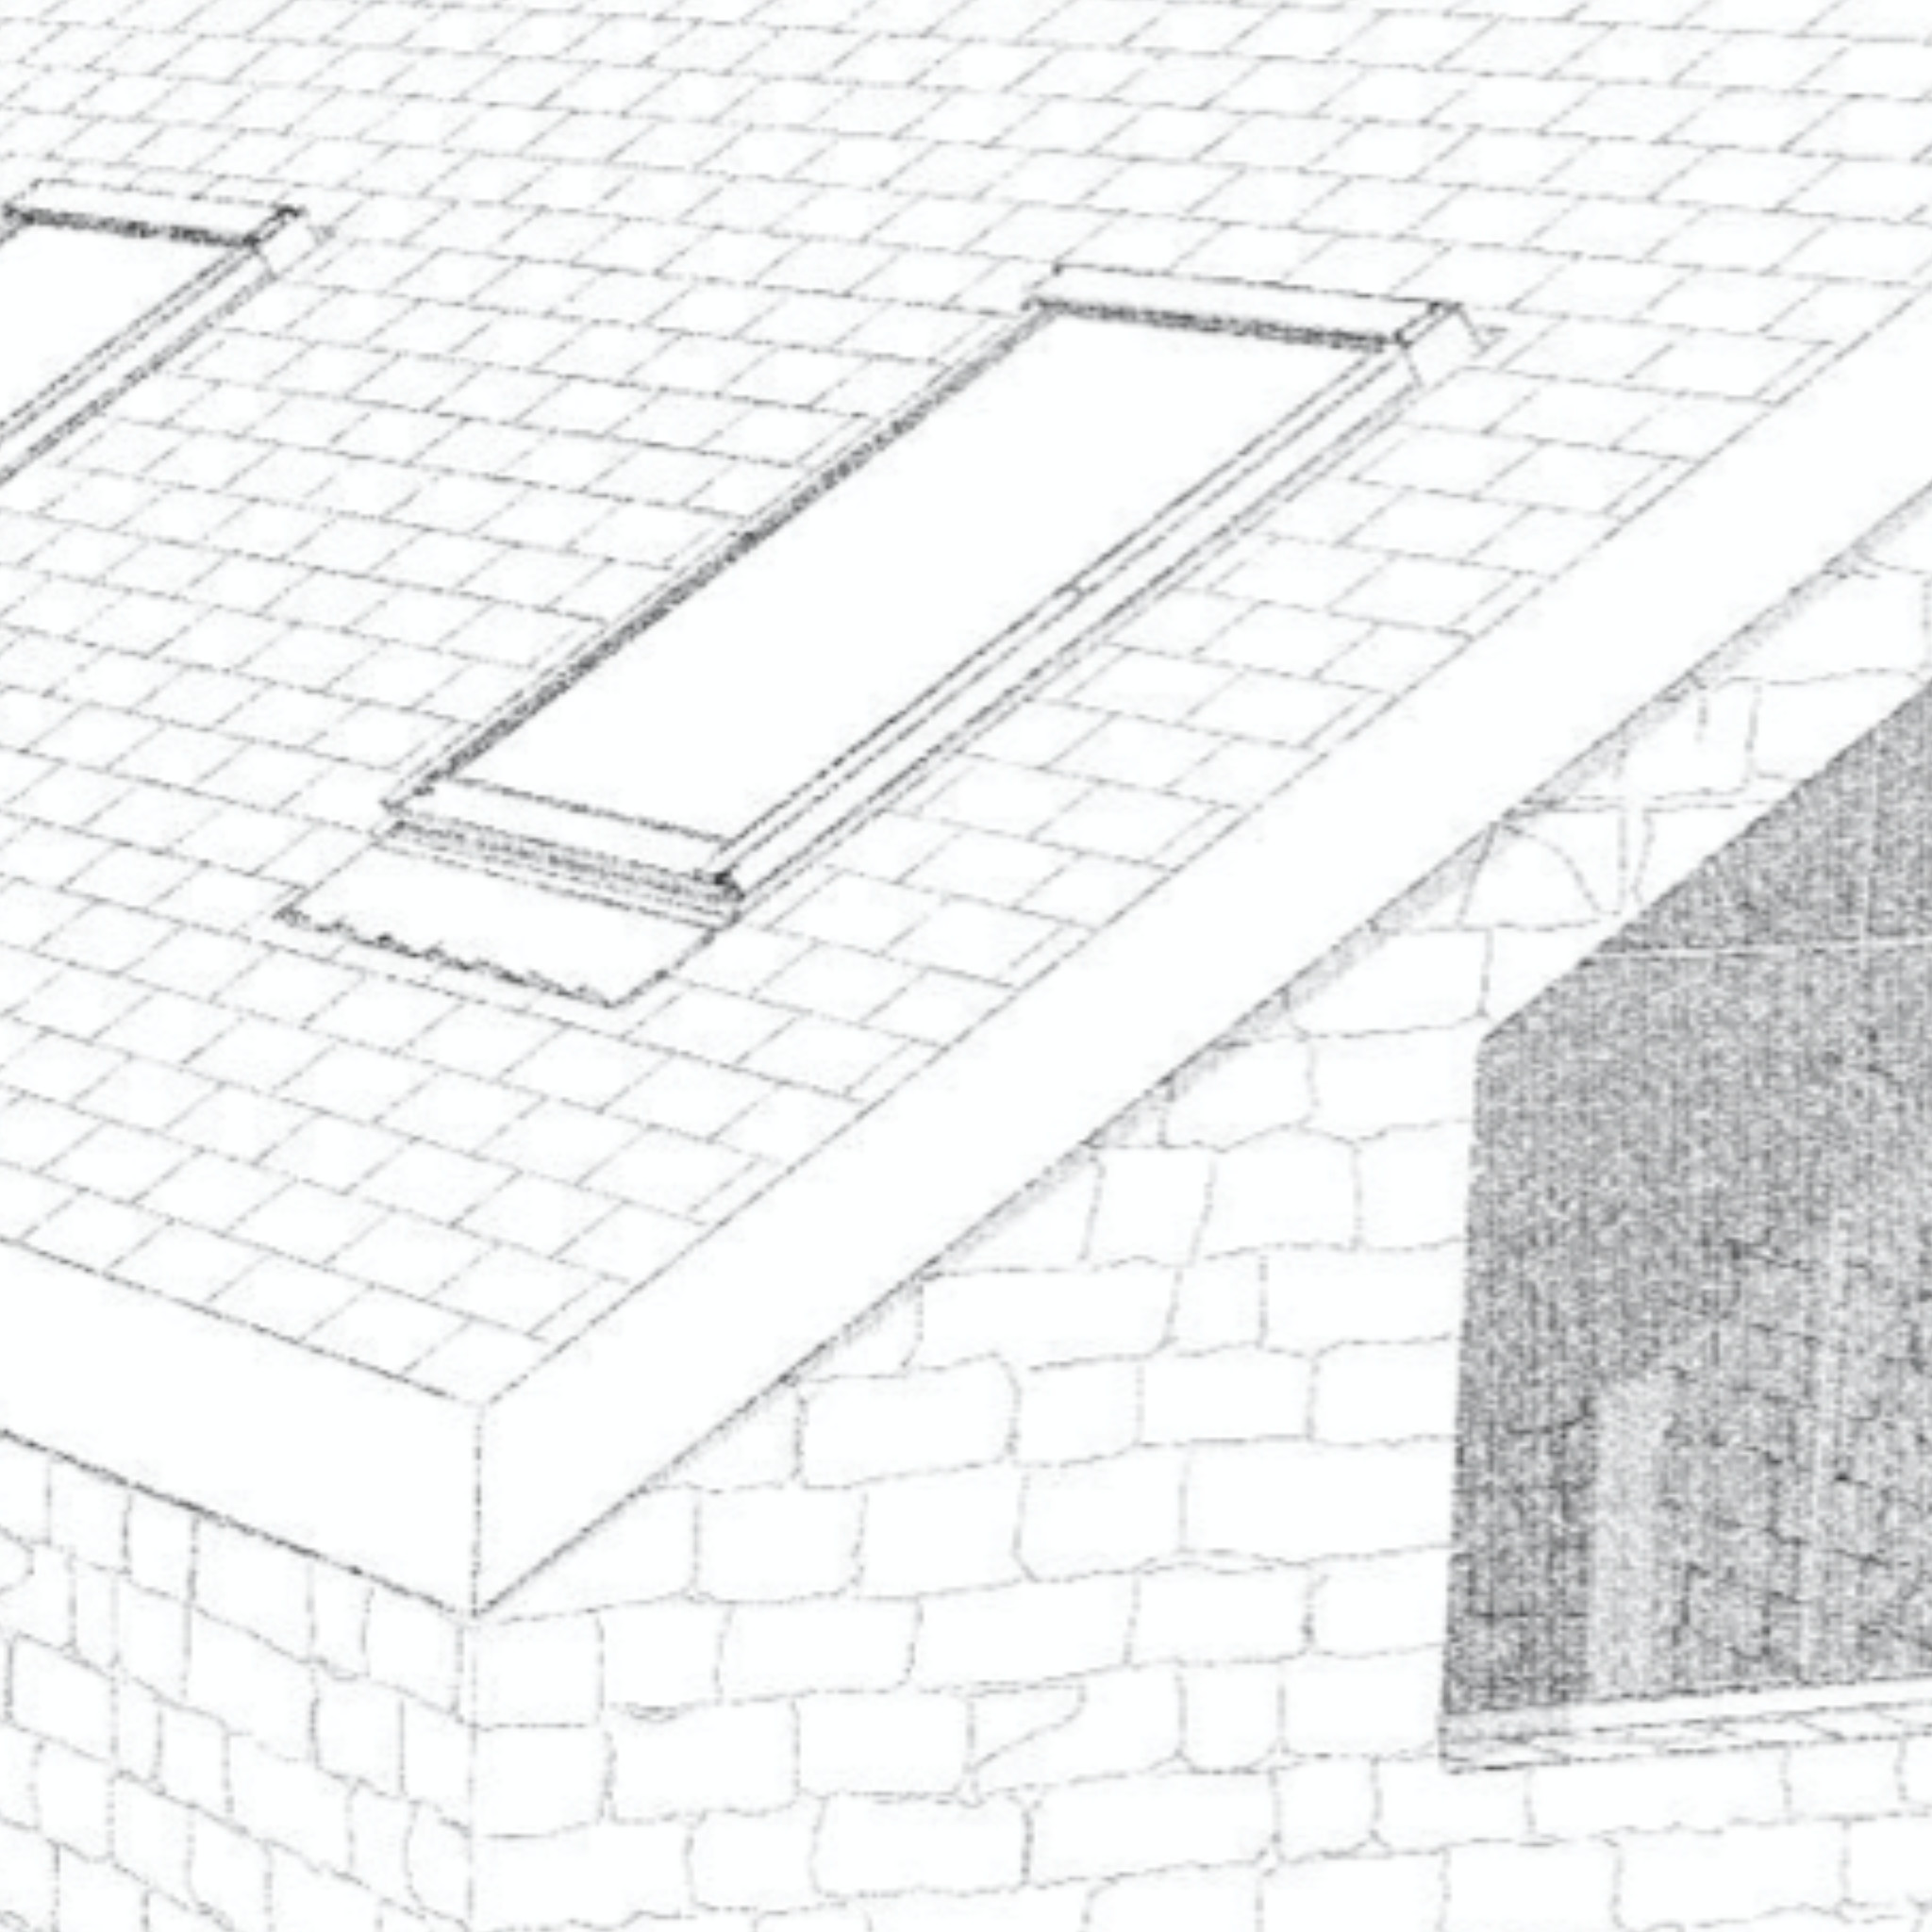 Newly developed JGA Guernsey granite material vectorial hatch (developed natively in ArchiCAD) drives display in elevation and section views - and also sketch rendered perspectives